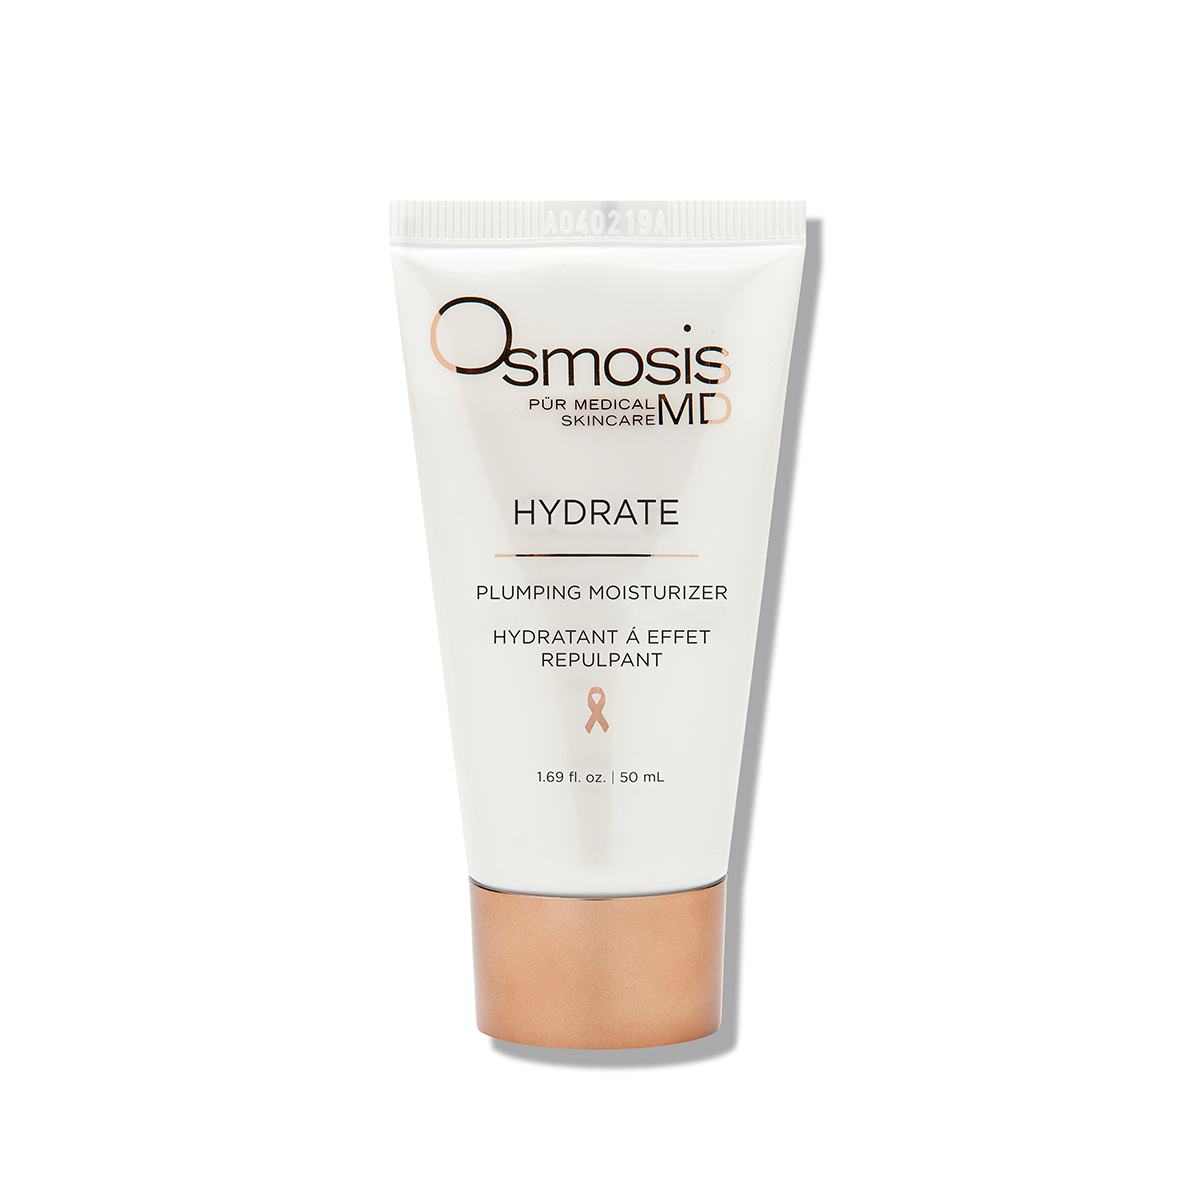 A white tube of Osmosis MD Hydrate Moisturizer with skin-smoothing peptide formula and organic Shea Butter. Encourages suppleness and elasticity. Ideal for aging, sensitive, and dry skin types.